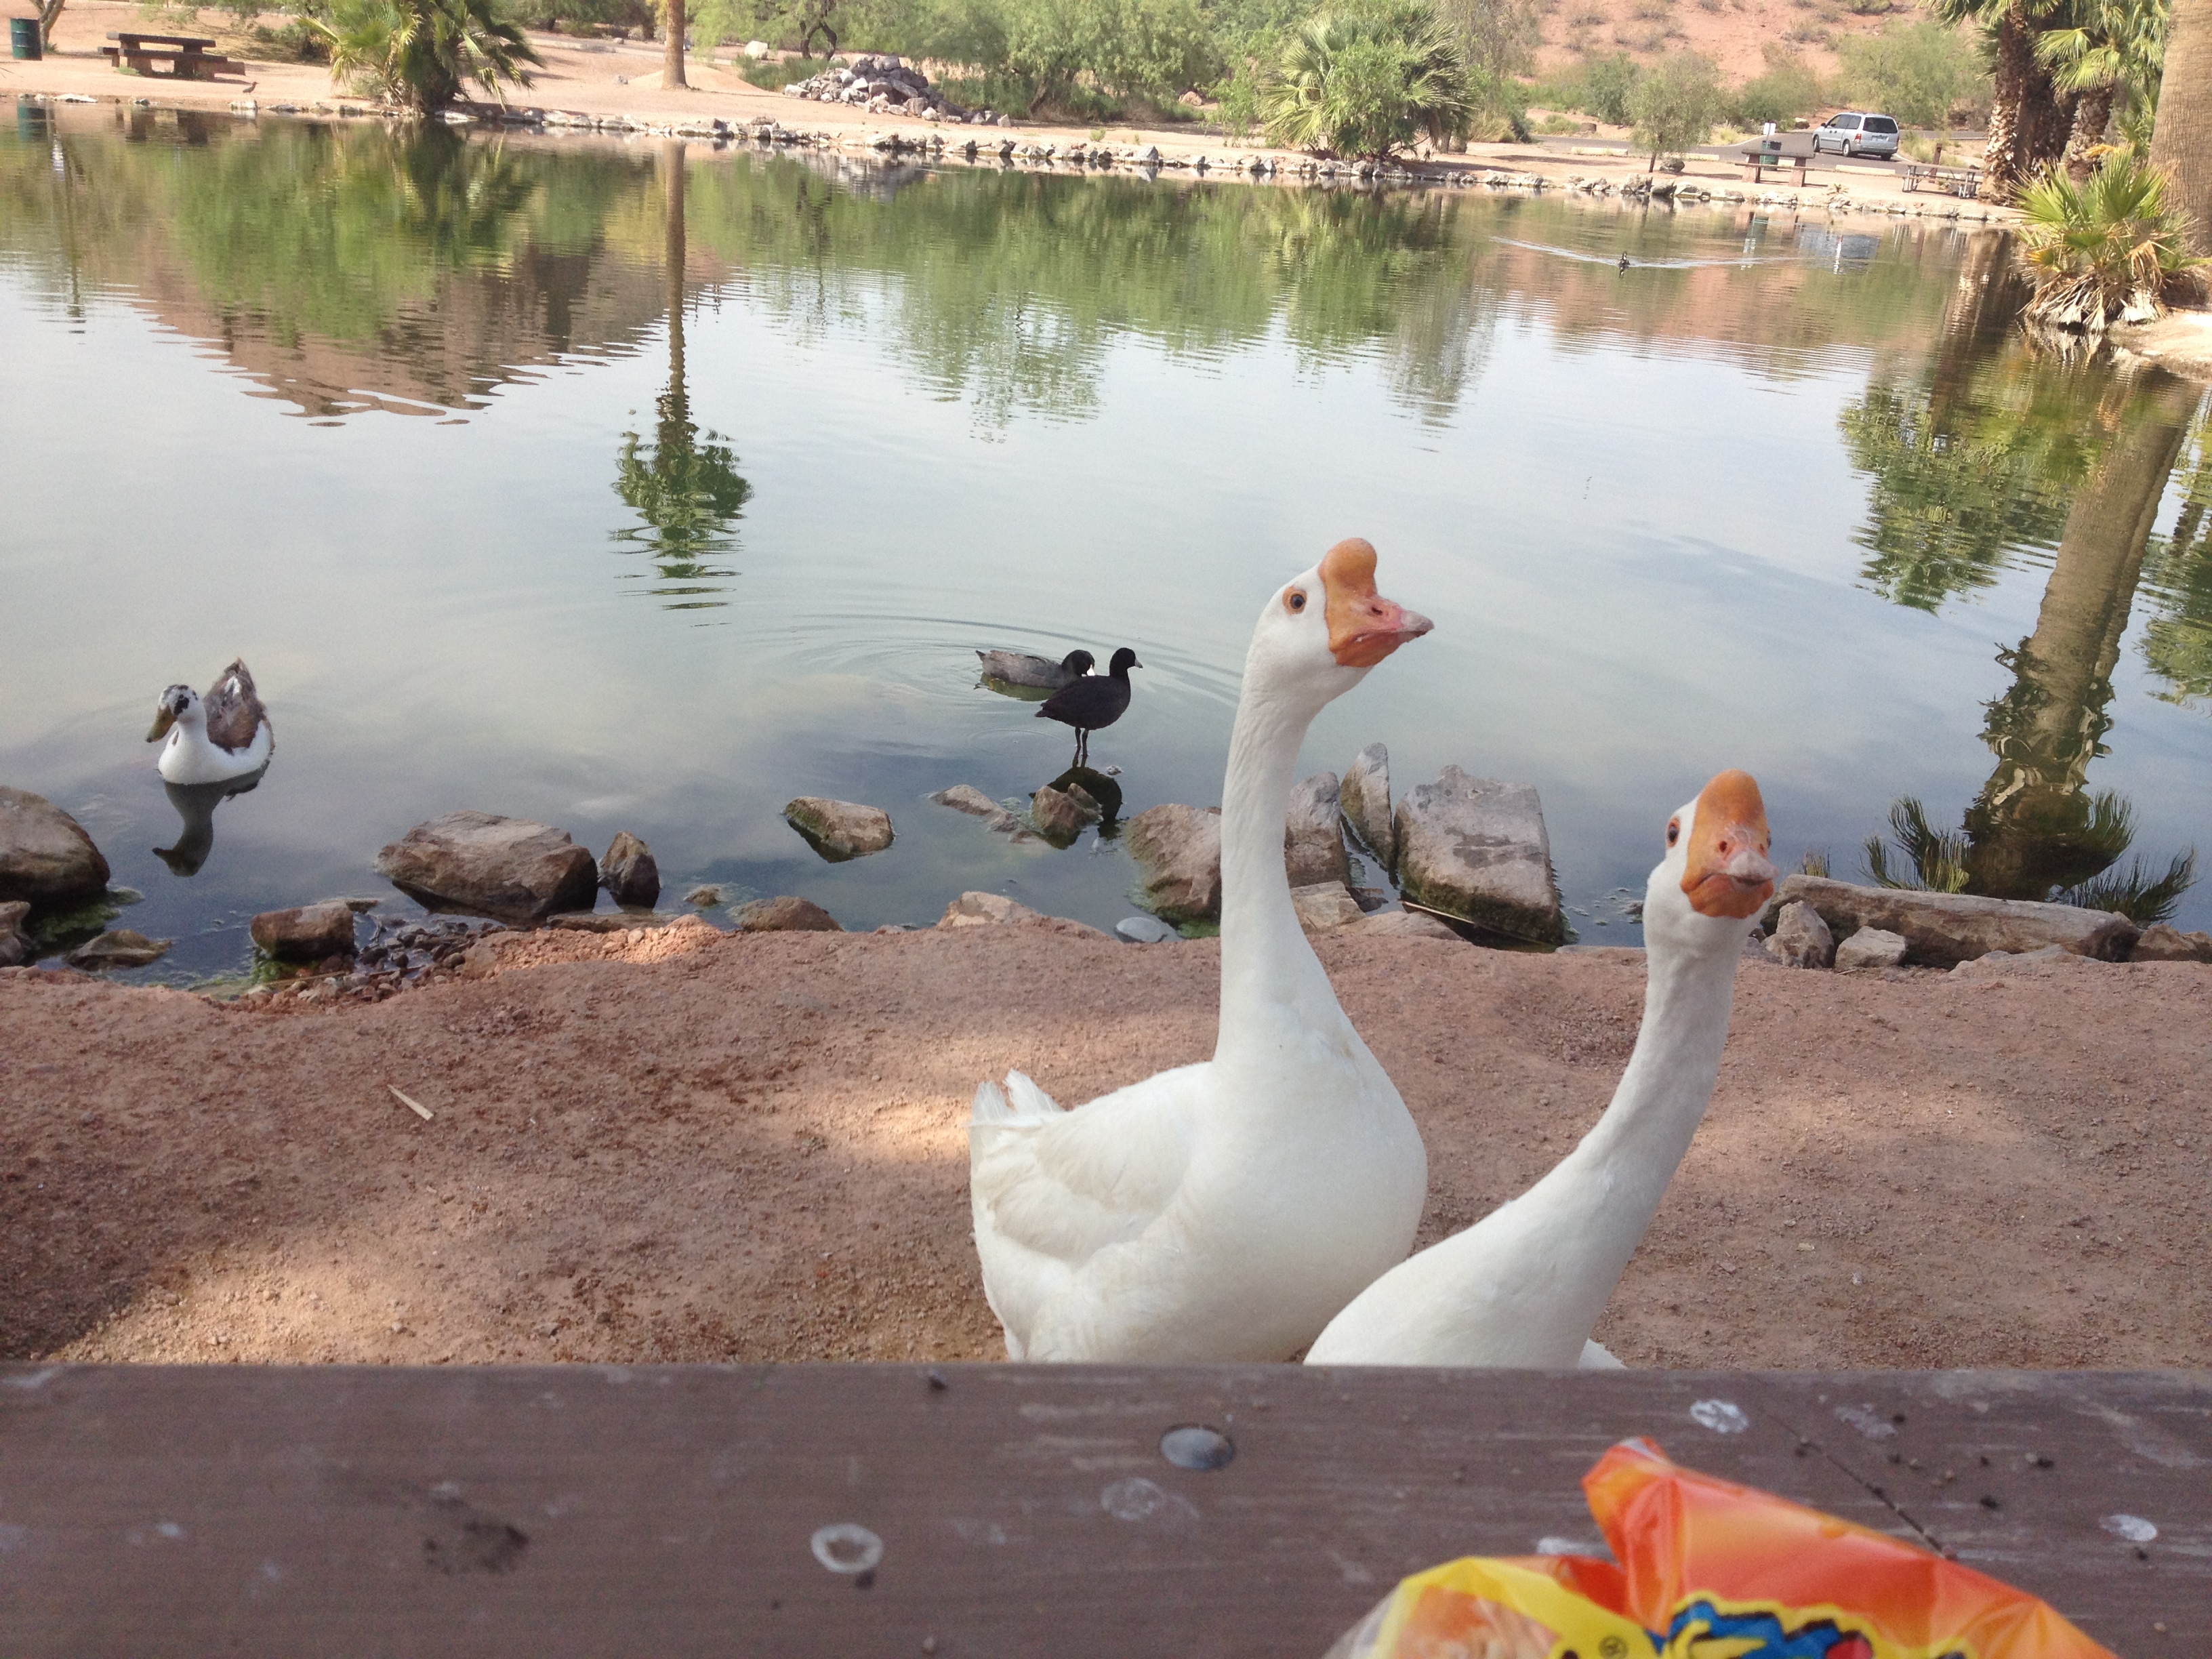 Pair of Geese in Papago Park on the Lake